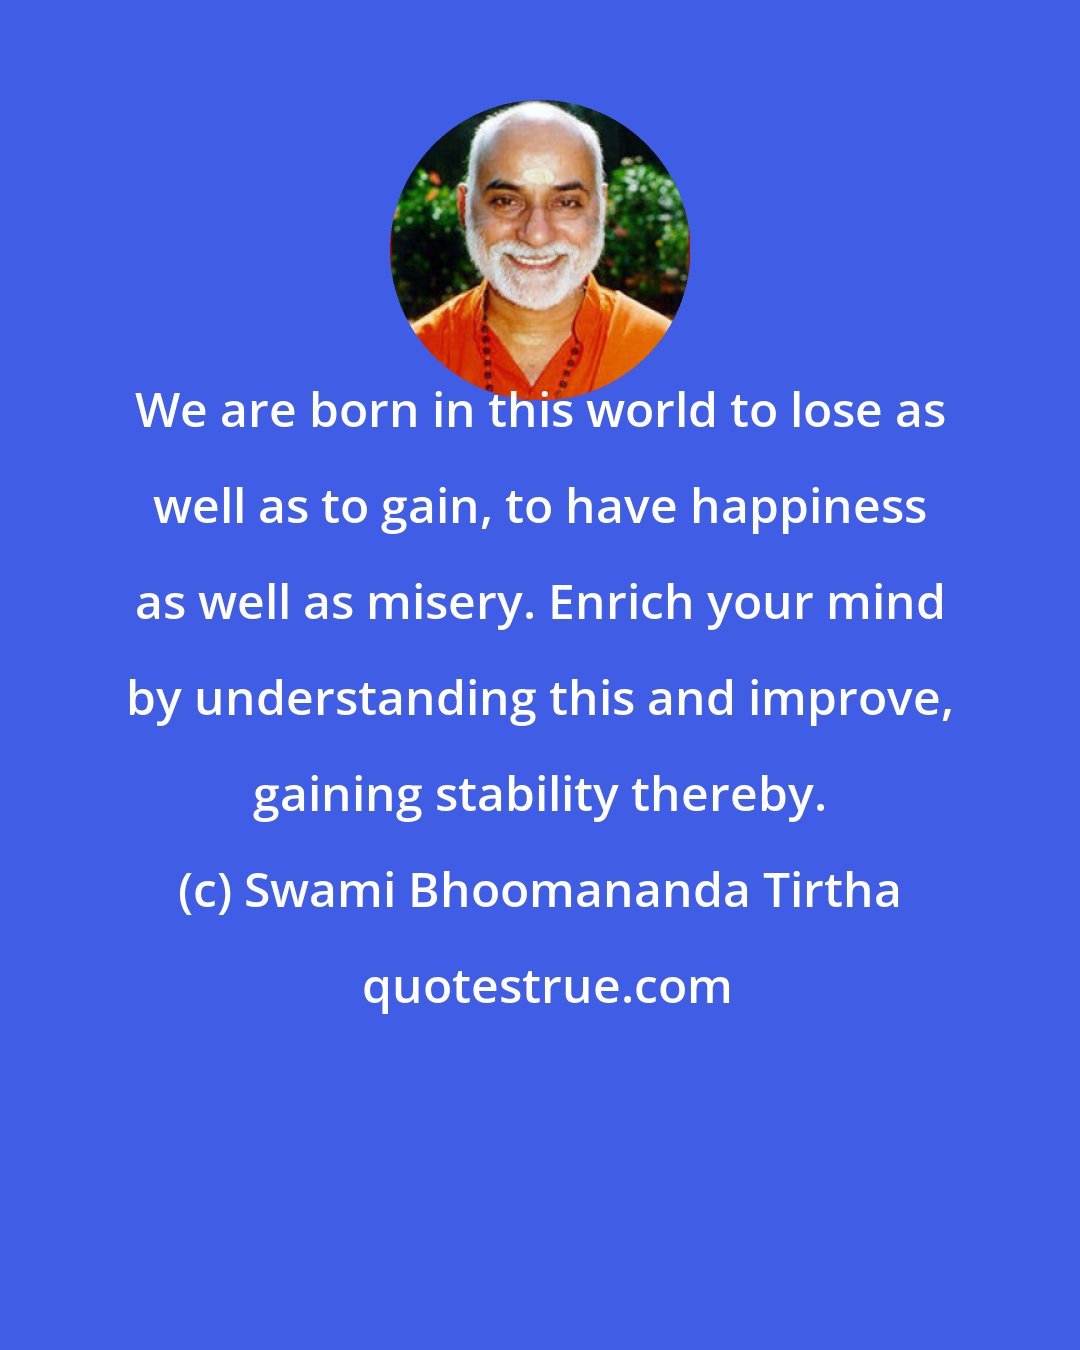 Swami Bhoomananda Tirtha: We are born in this world to lose as well as to gain, to have happiness as well as misery. Enrich your mind by understanding this and improve, gaining stability thereby.